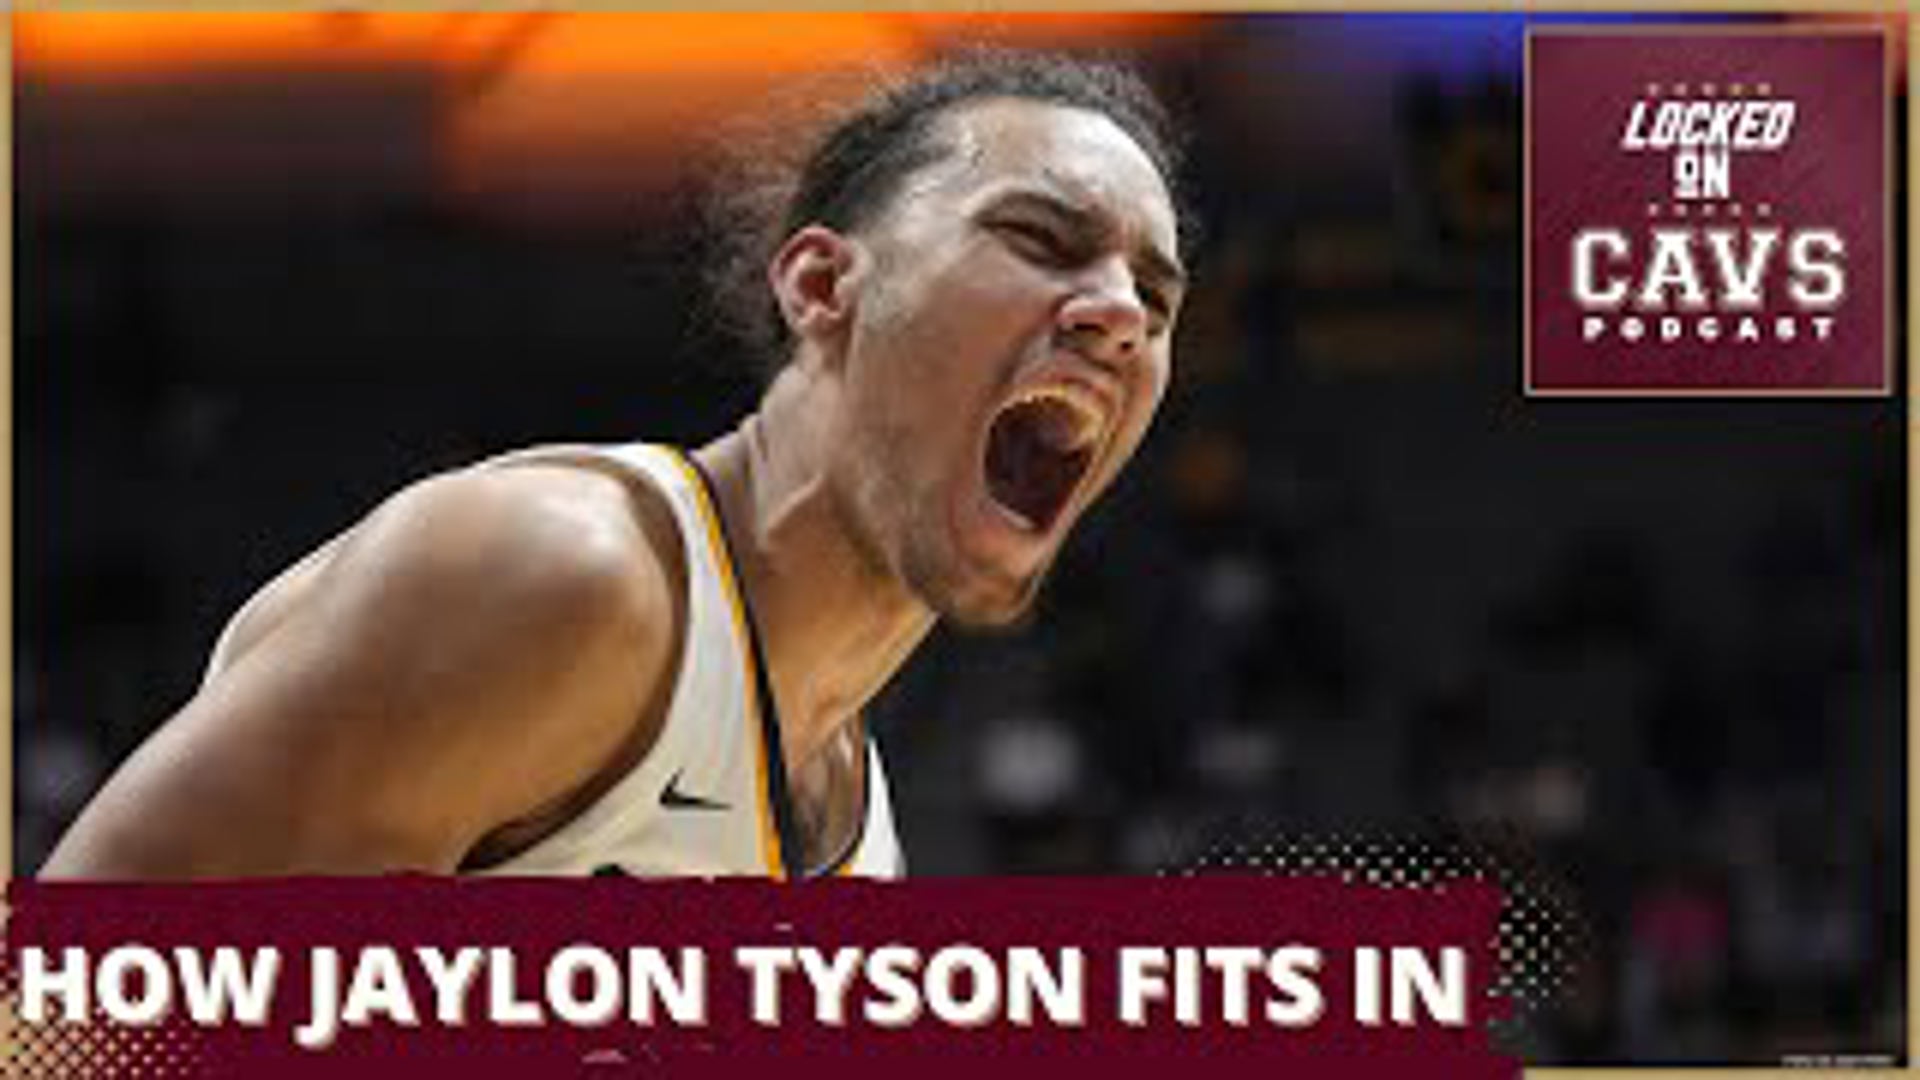 The Cavs can use Jaylon Tyson in a number of different ways once he acclimates to life as an NBA player.